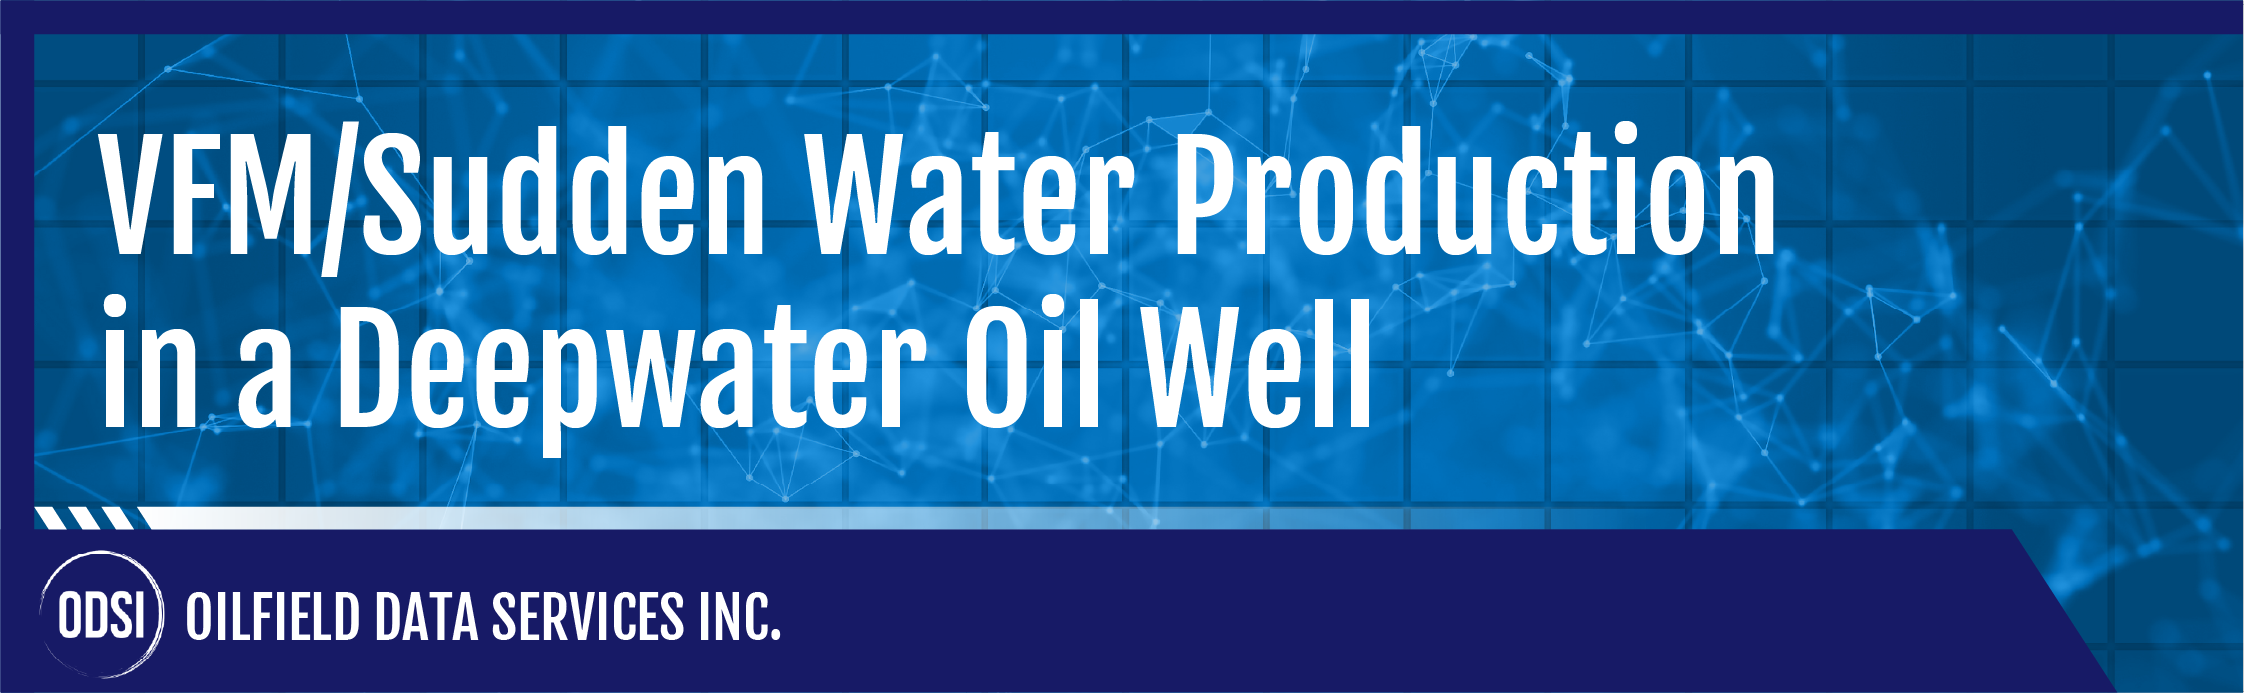 VFM/Sudden Water Production in a Deepwater Oil Well